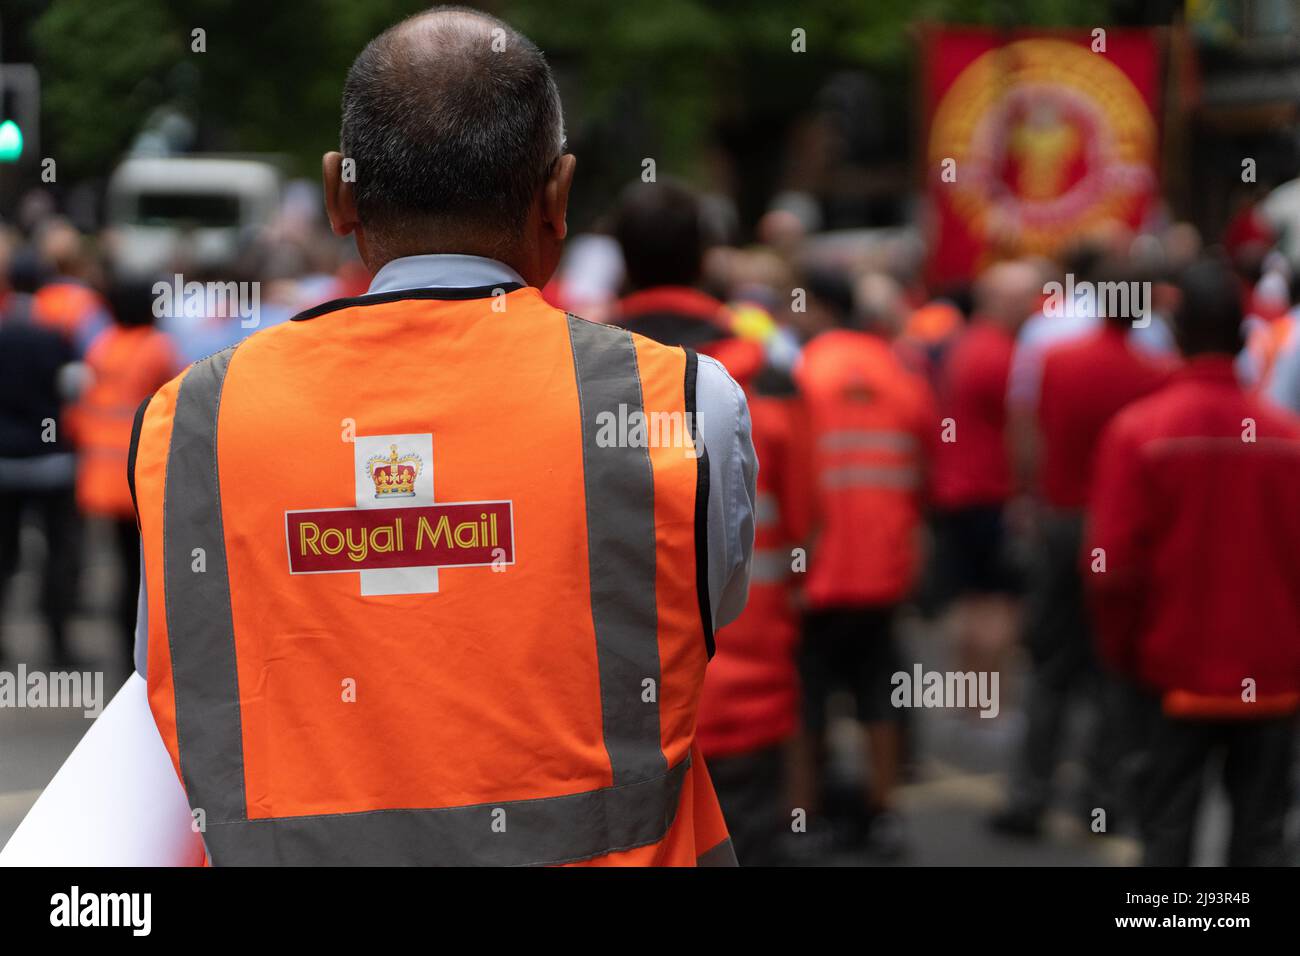 ROYAL MAIL workers gathering Stock Photo